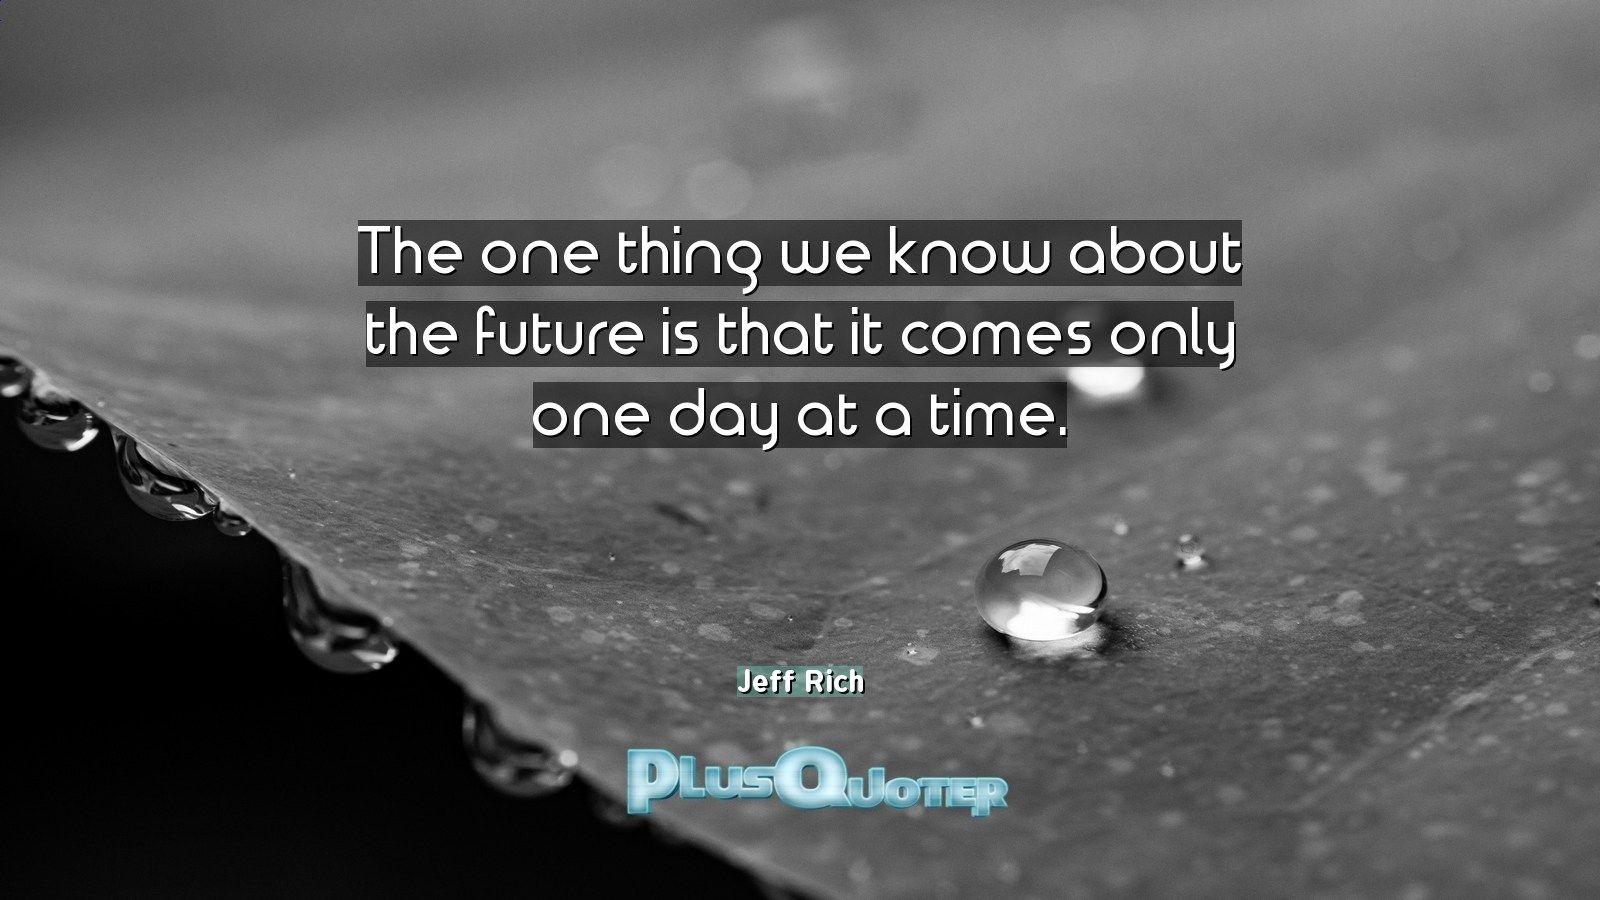 The one thing we know about the future is that it comes only one